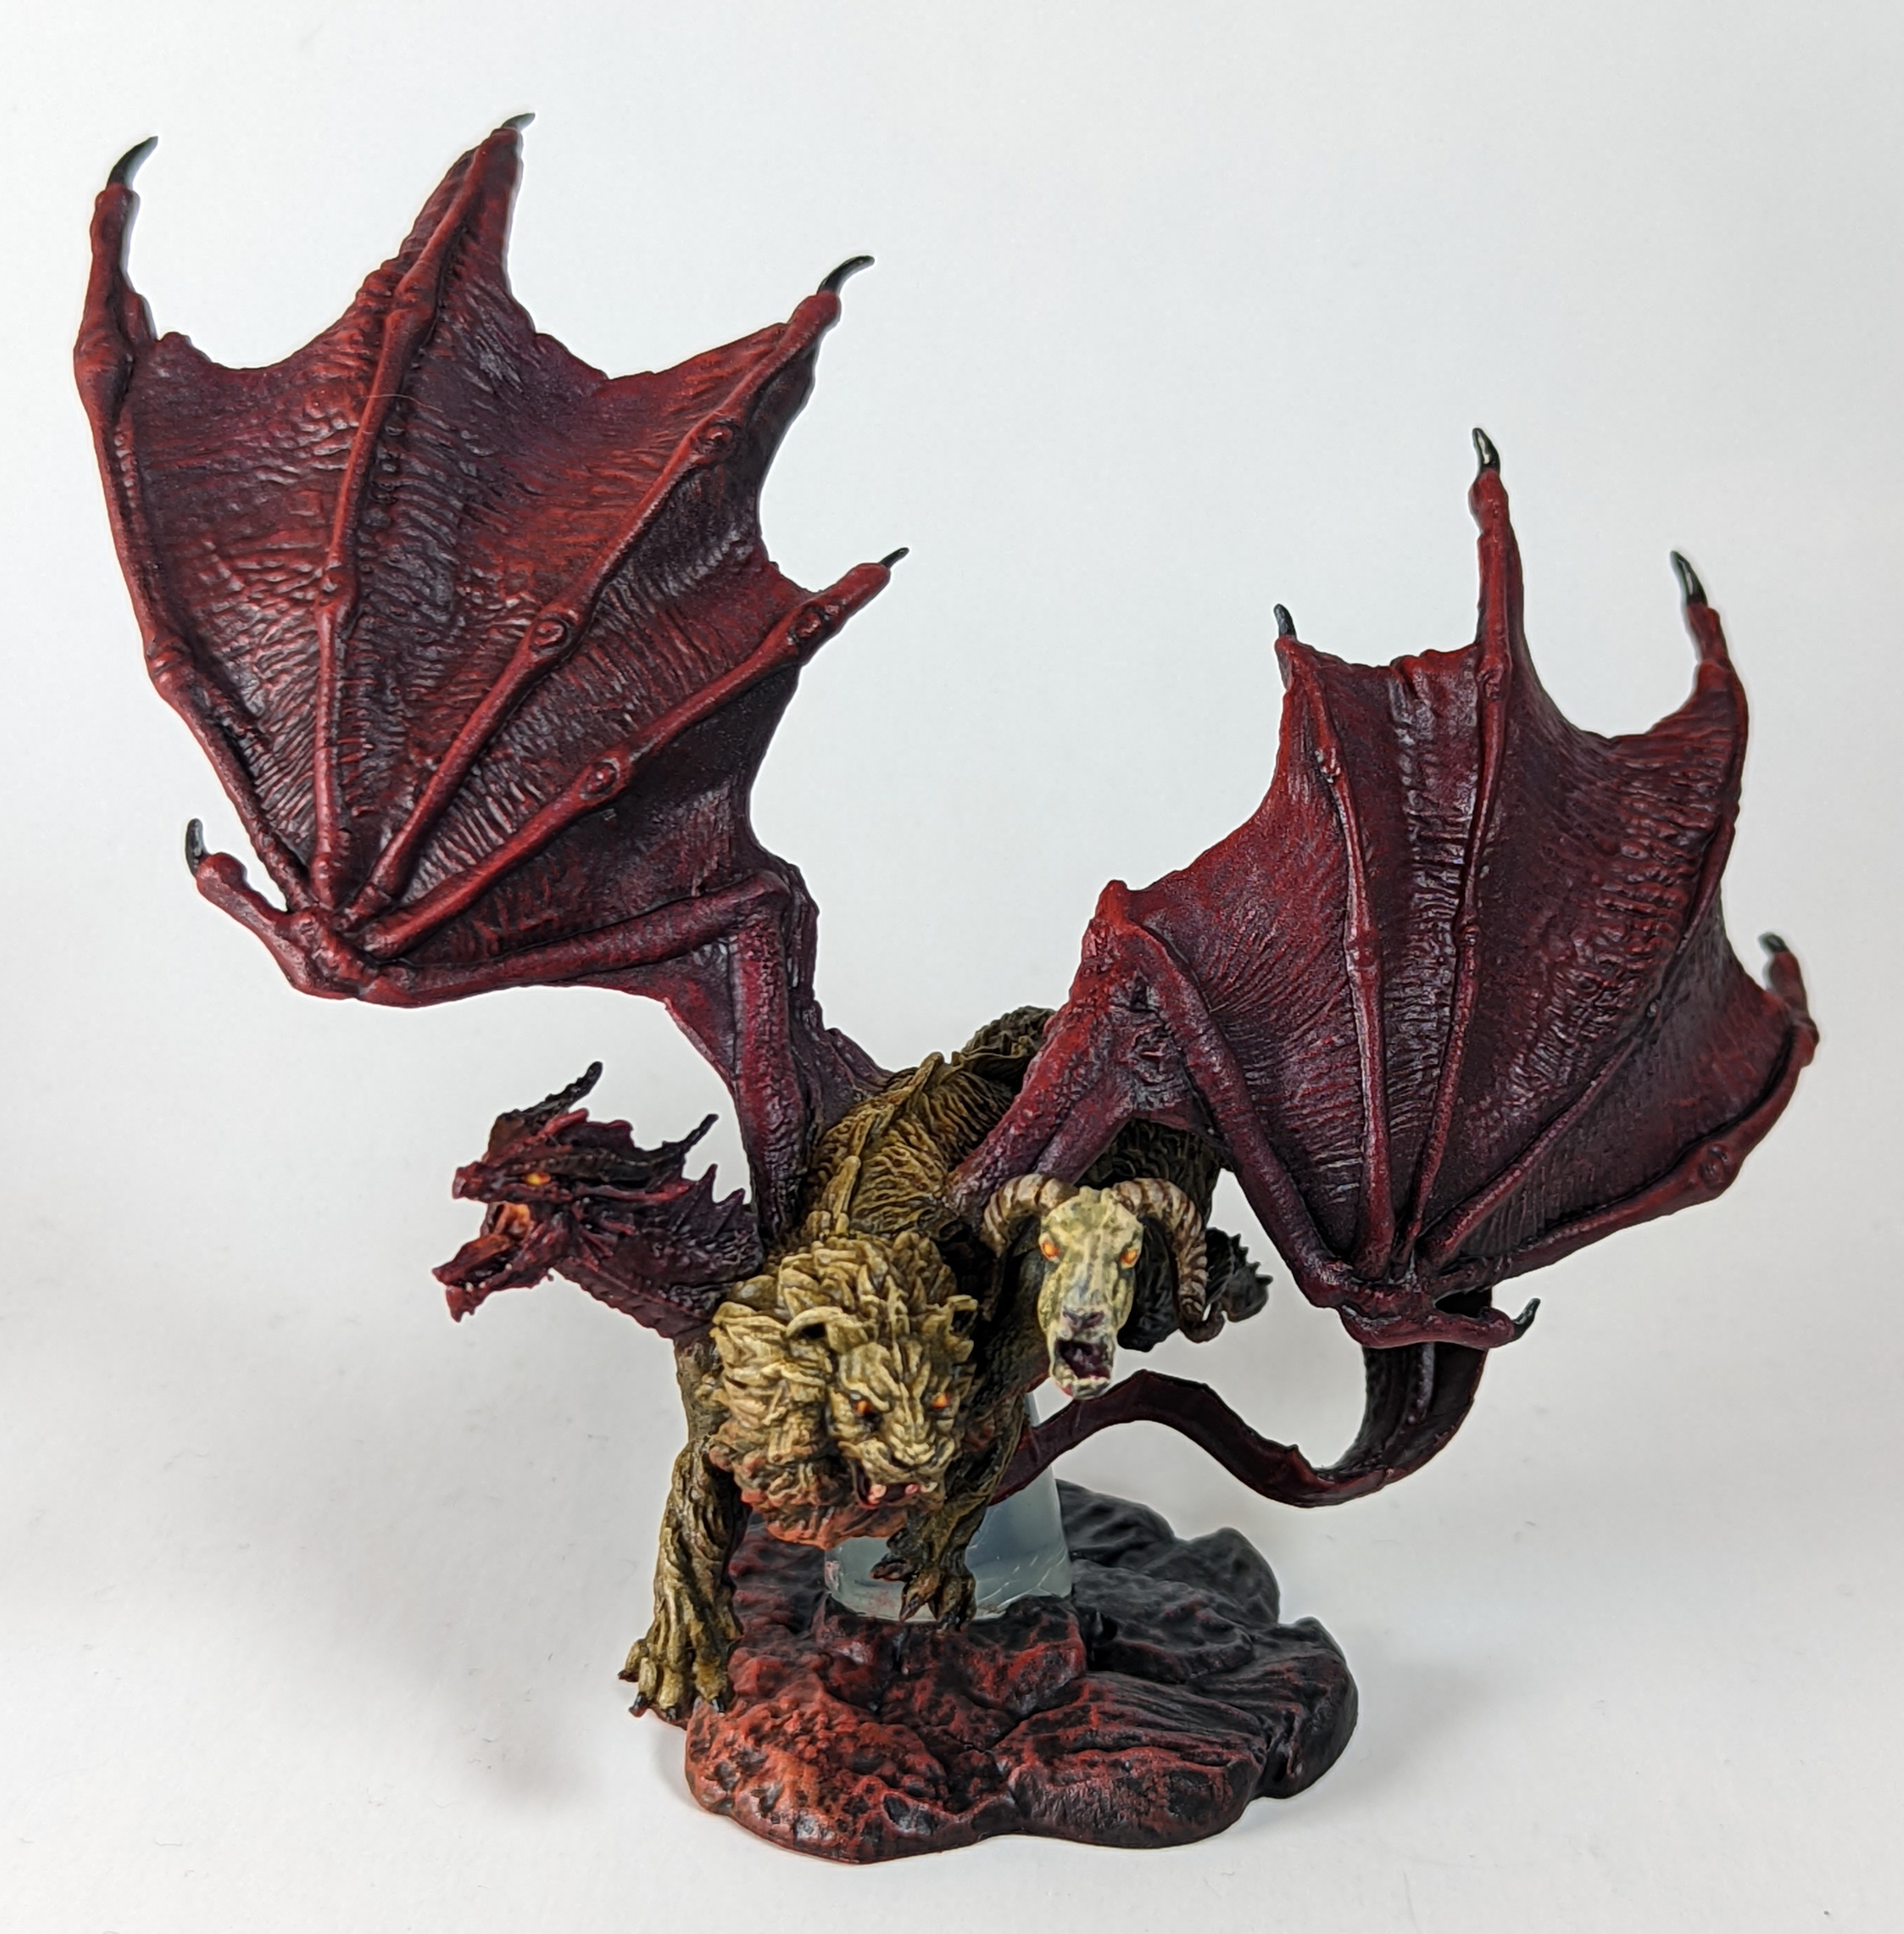 Wizkids Chimera for the Noble Knight painting contest I’m gonna not even place in